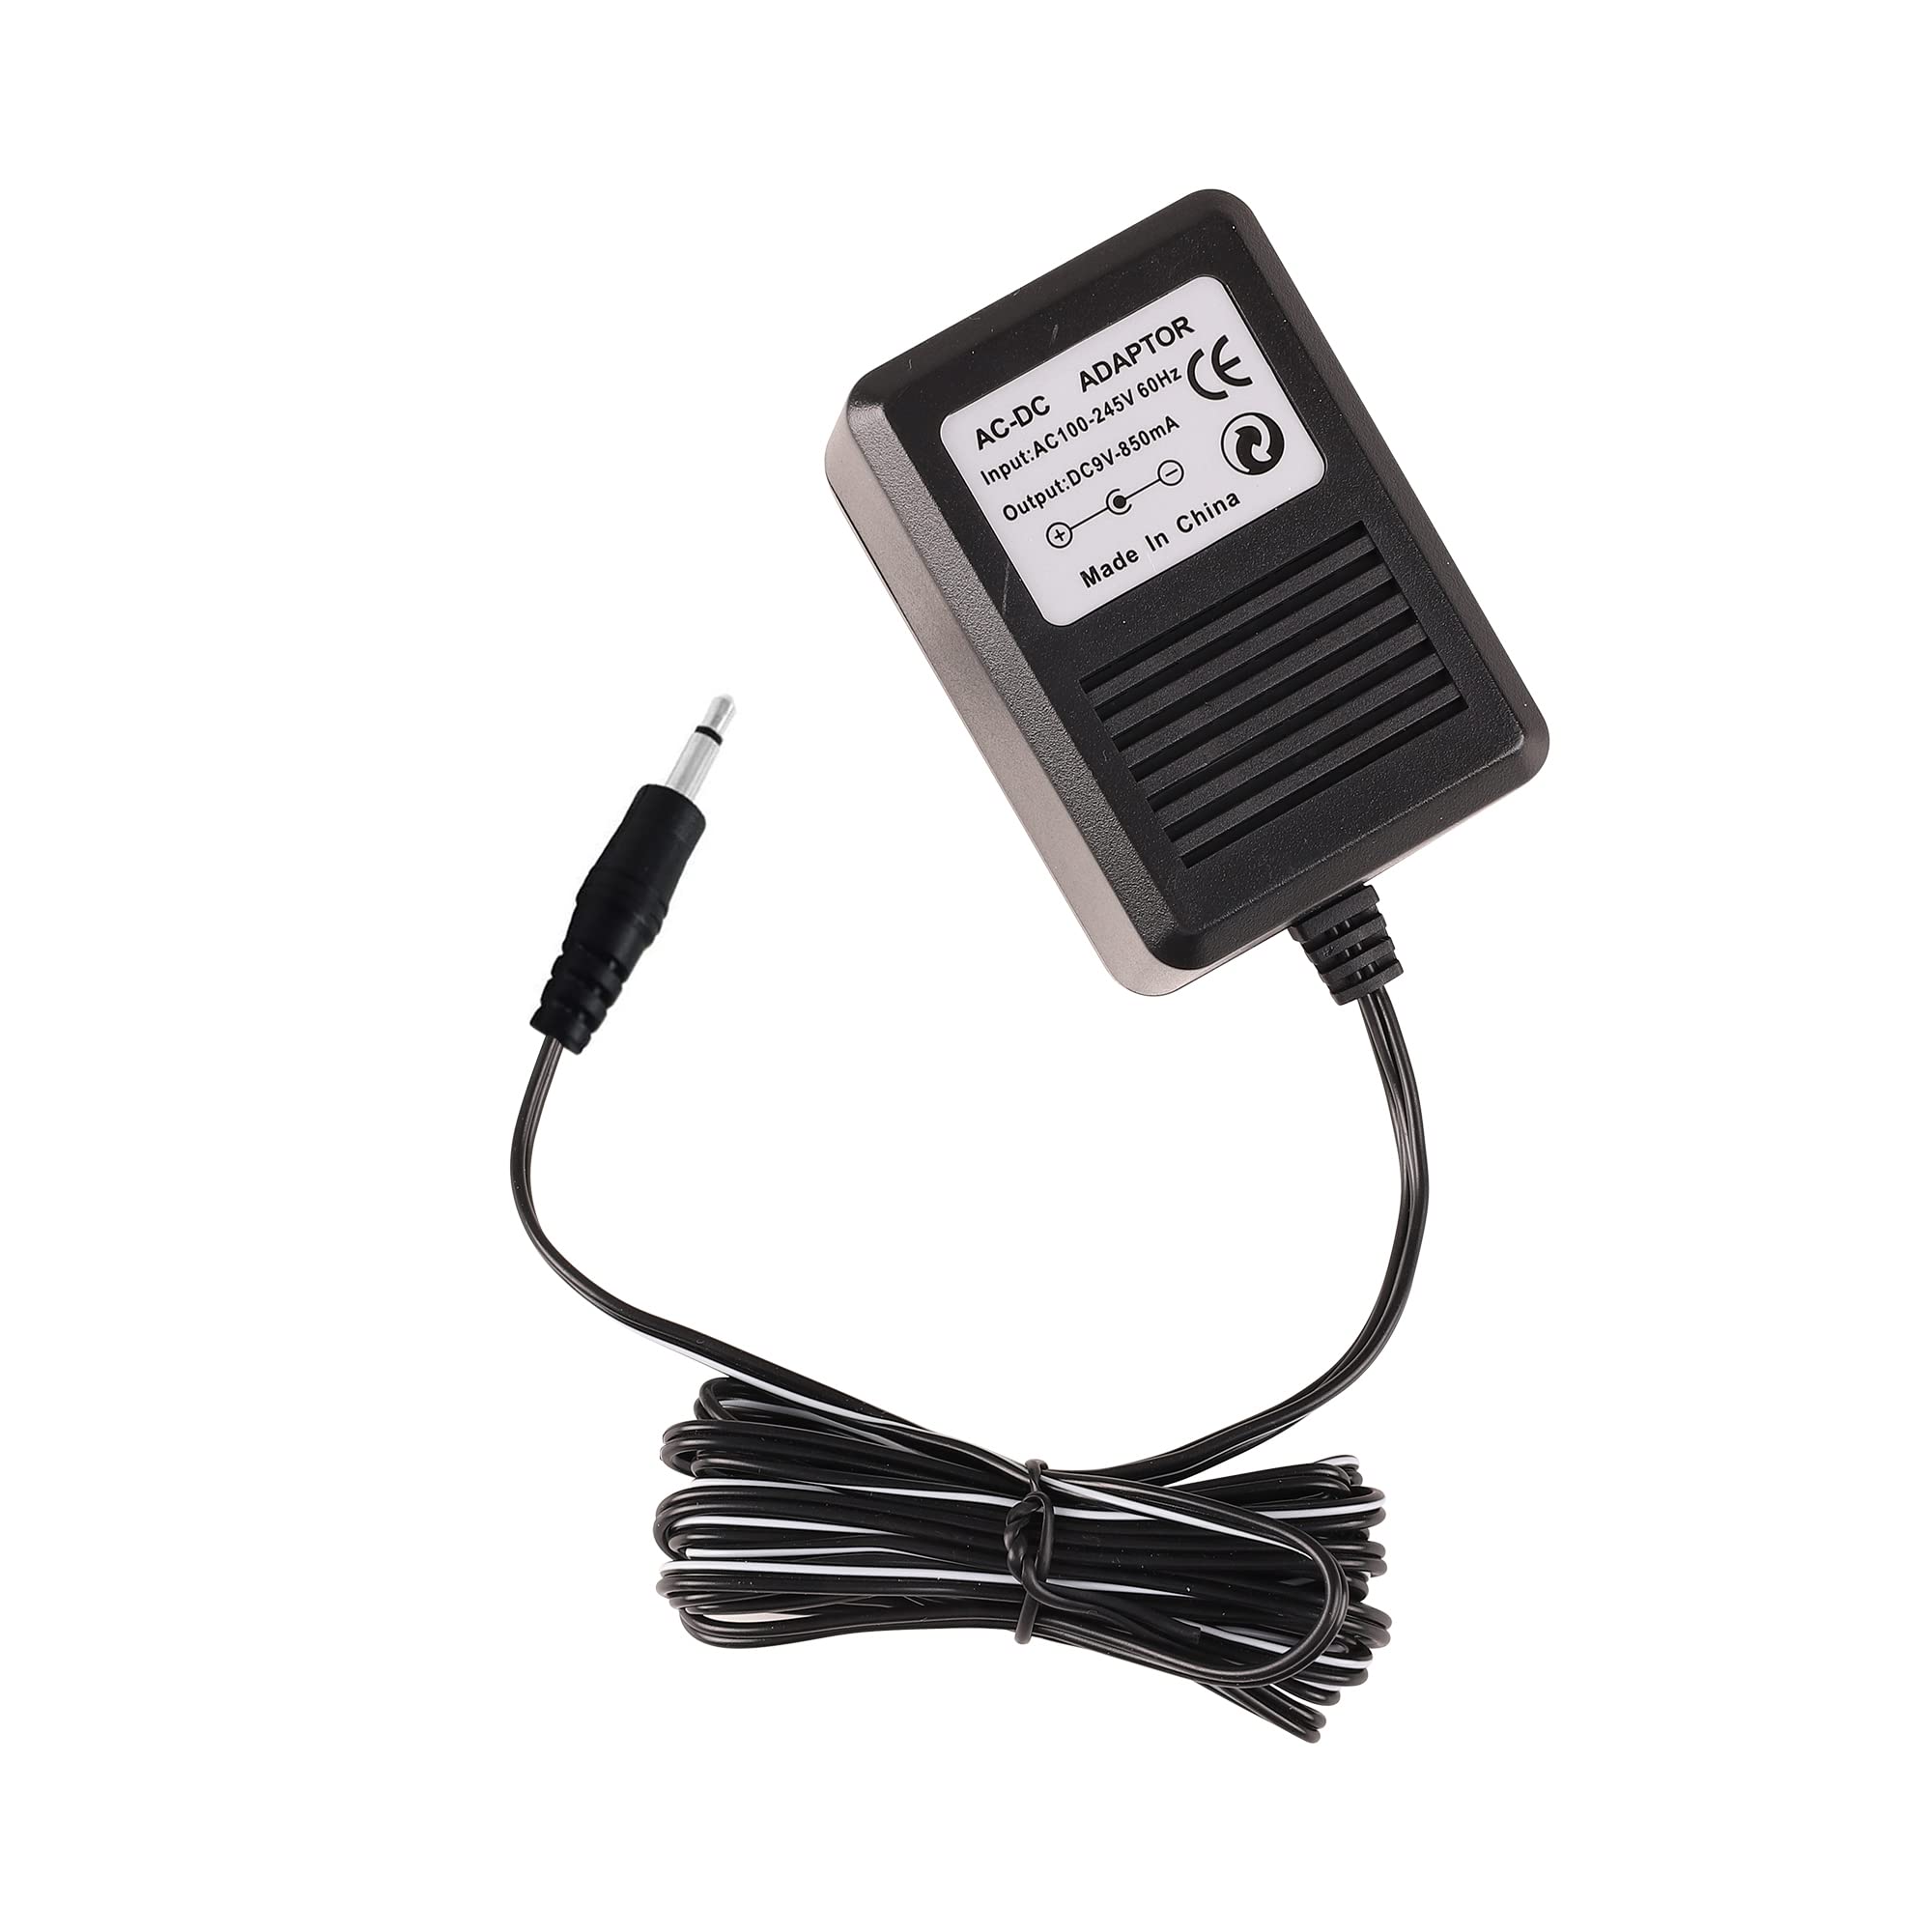 Power Supply for Atari 2600, AC Power Cord Adapter Compatible with Atari 2600 System Console 9V/850mA US Plug